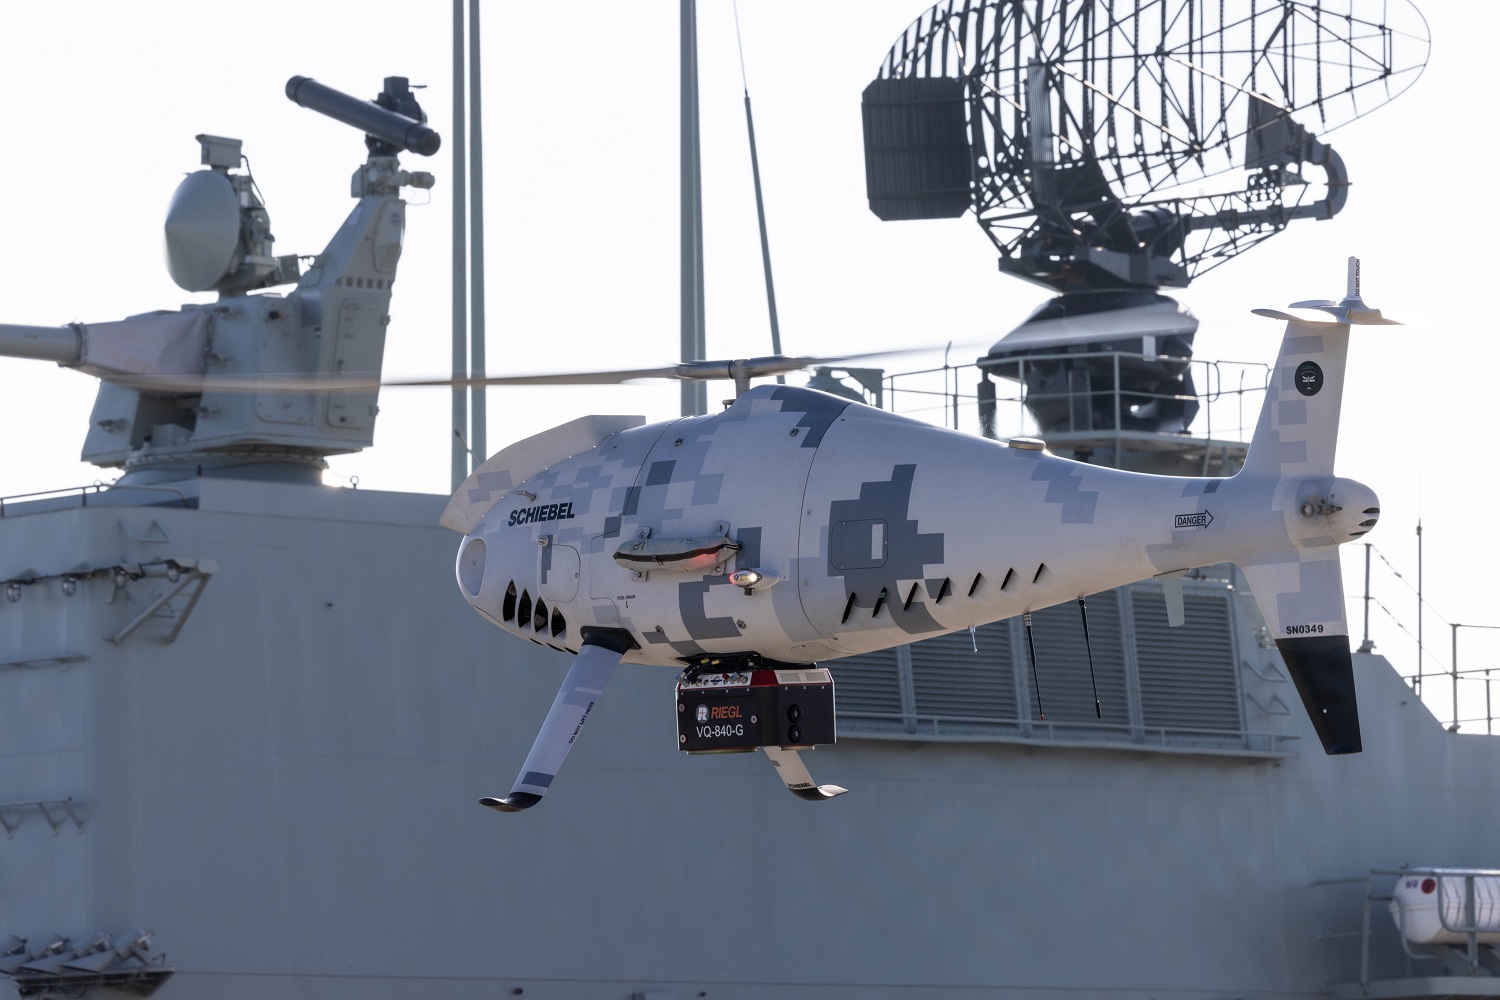 Schiebel CAMCOPTER S-100 Unmanned Aerial Vehicle Excels at Major NATO Exercise